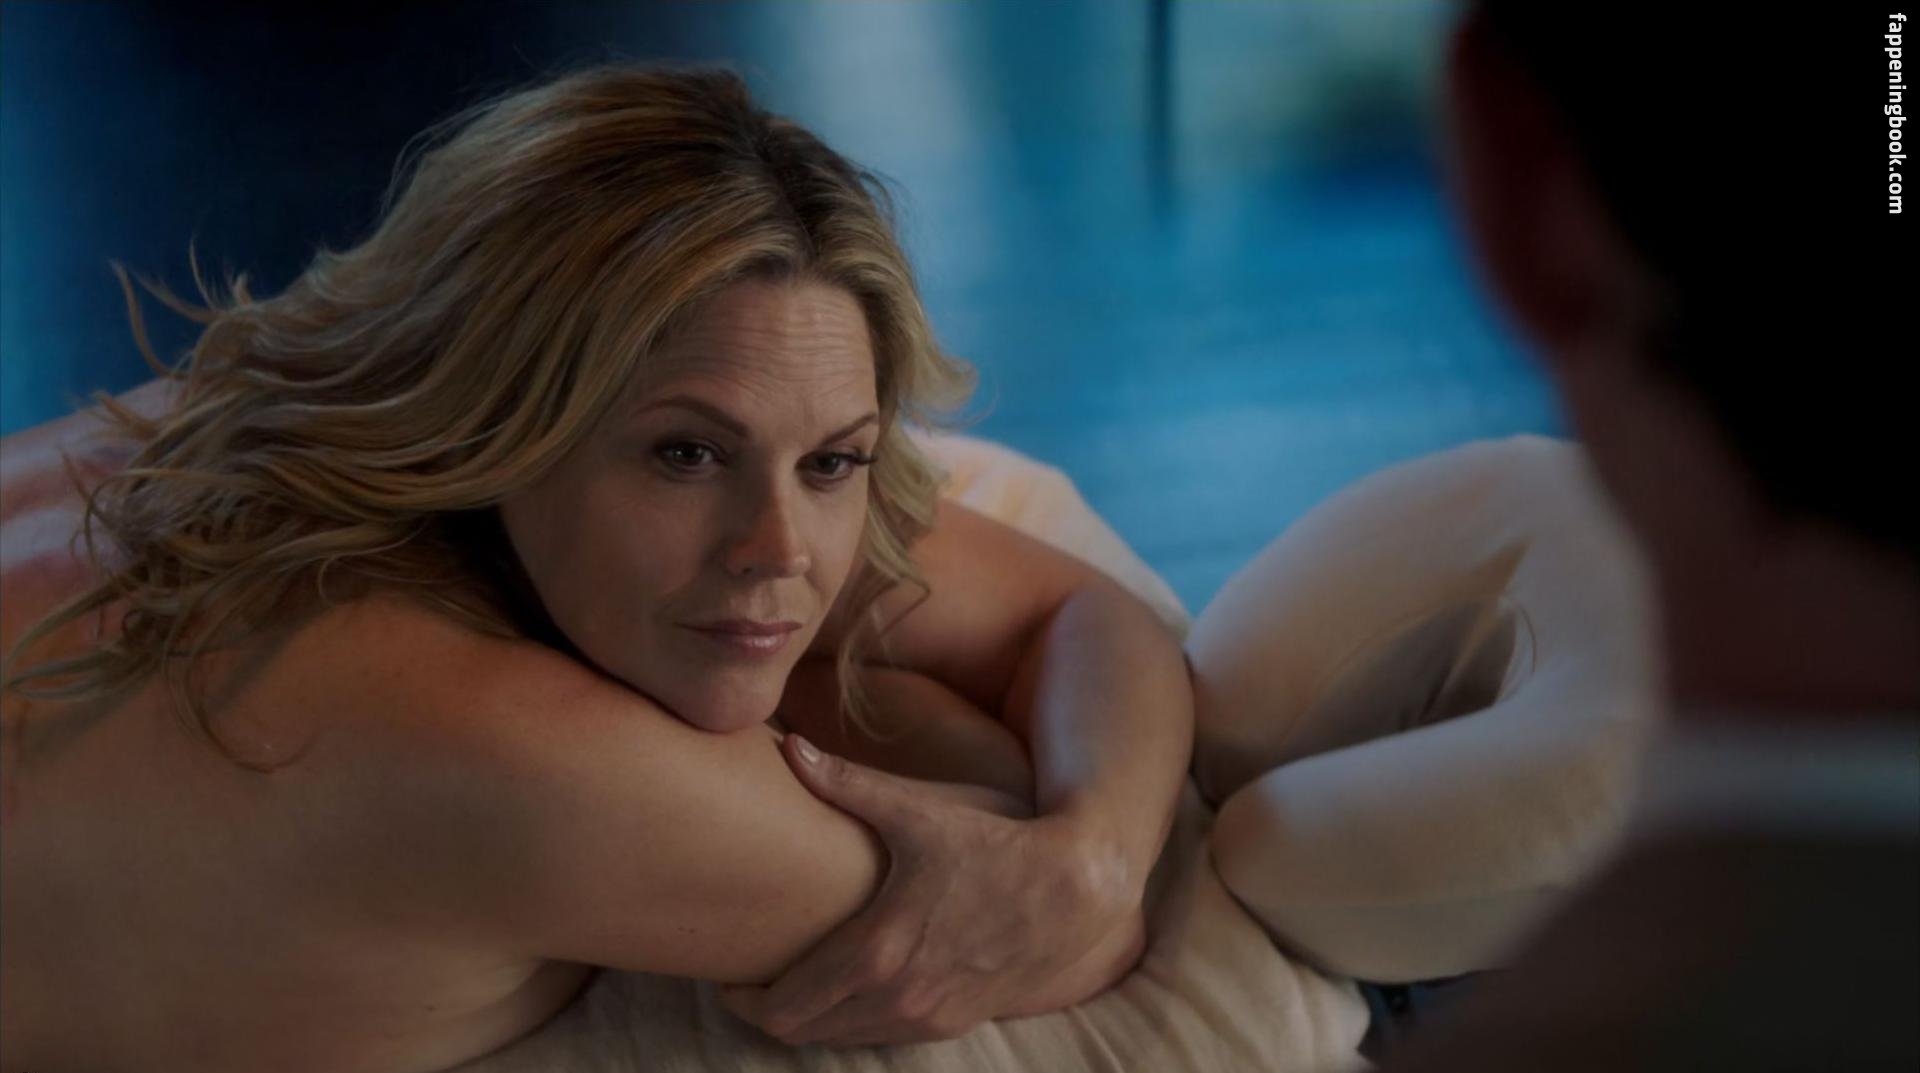 Mary mccormack nude pic